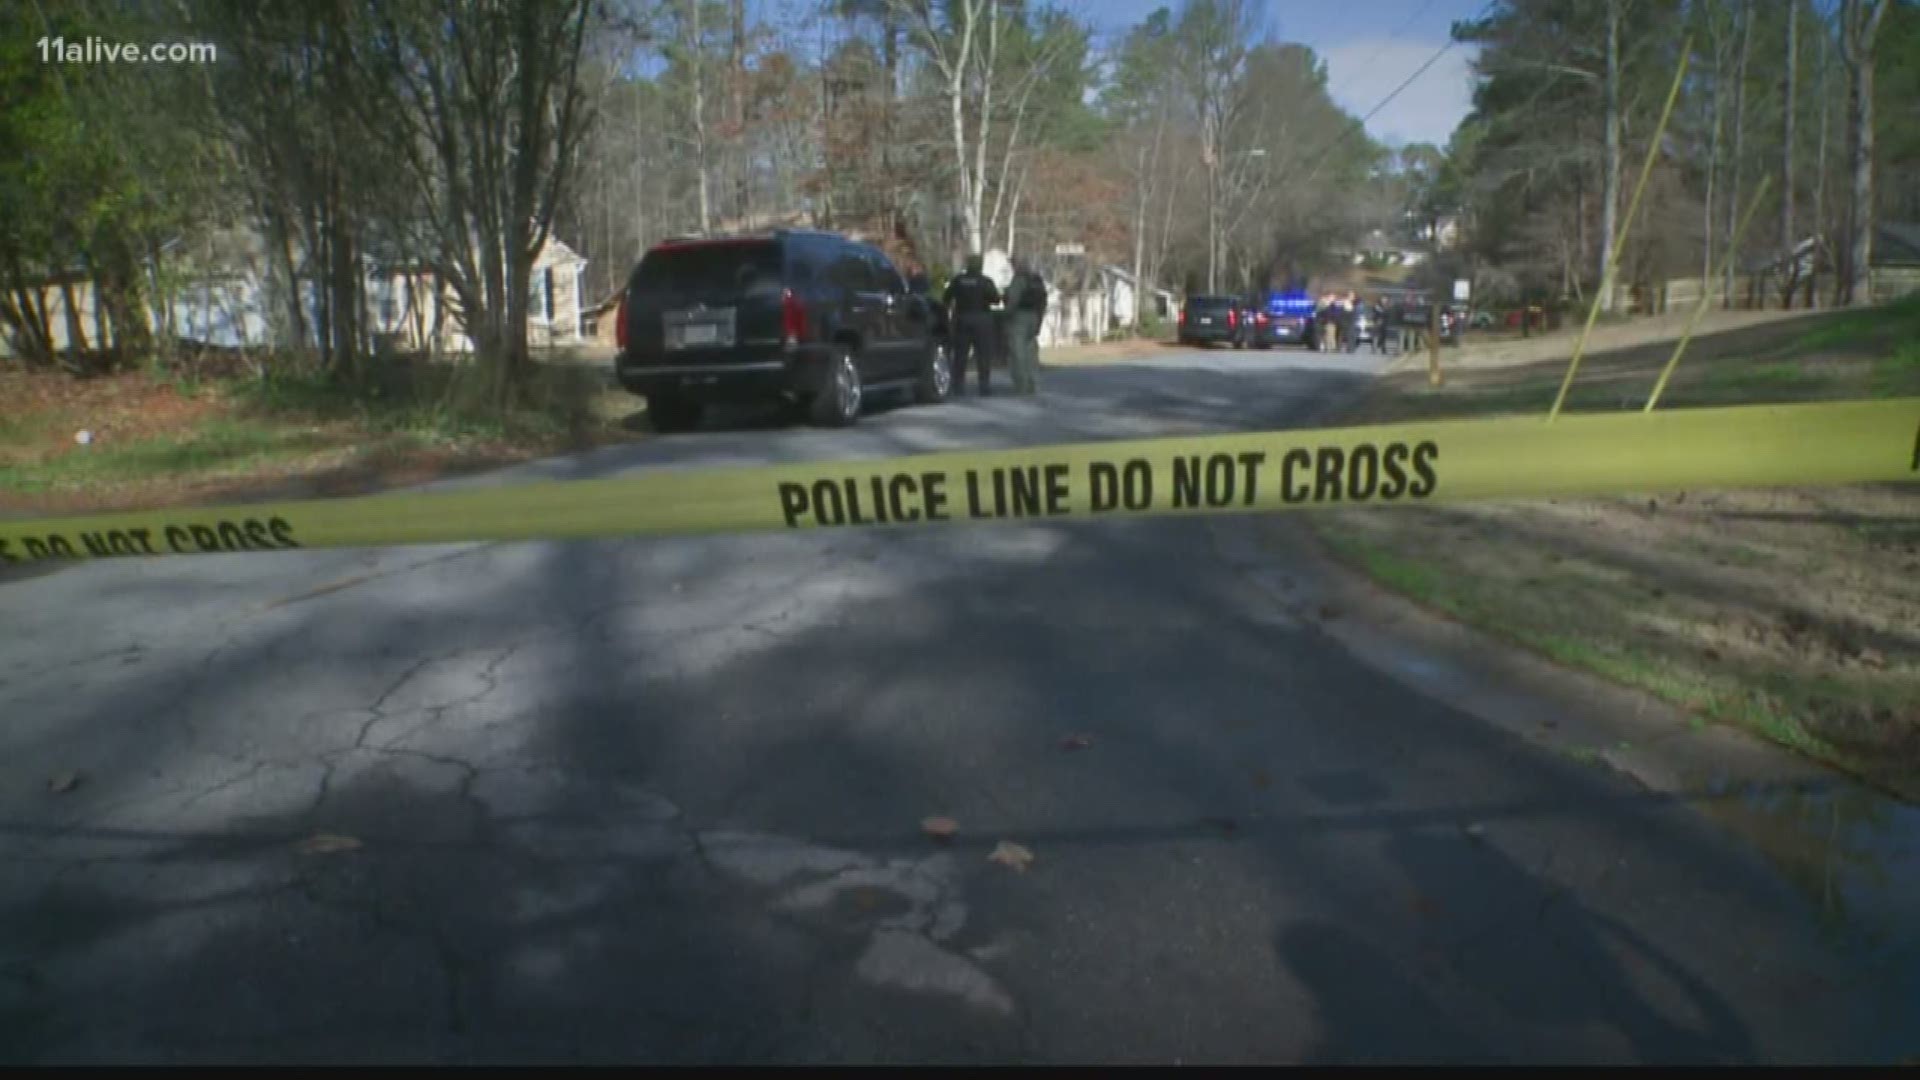 Cobb Police were among the many law enforcement officers at an officer-involved shooting Thursday morning that left a teenage murder suspect dead.